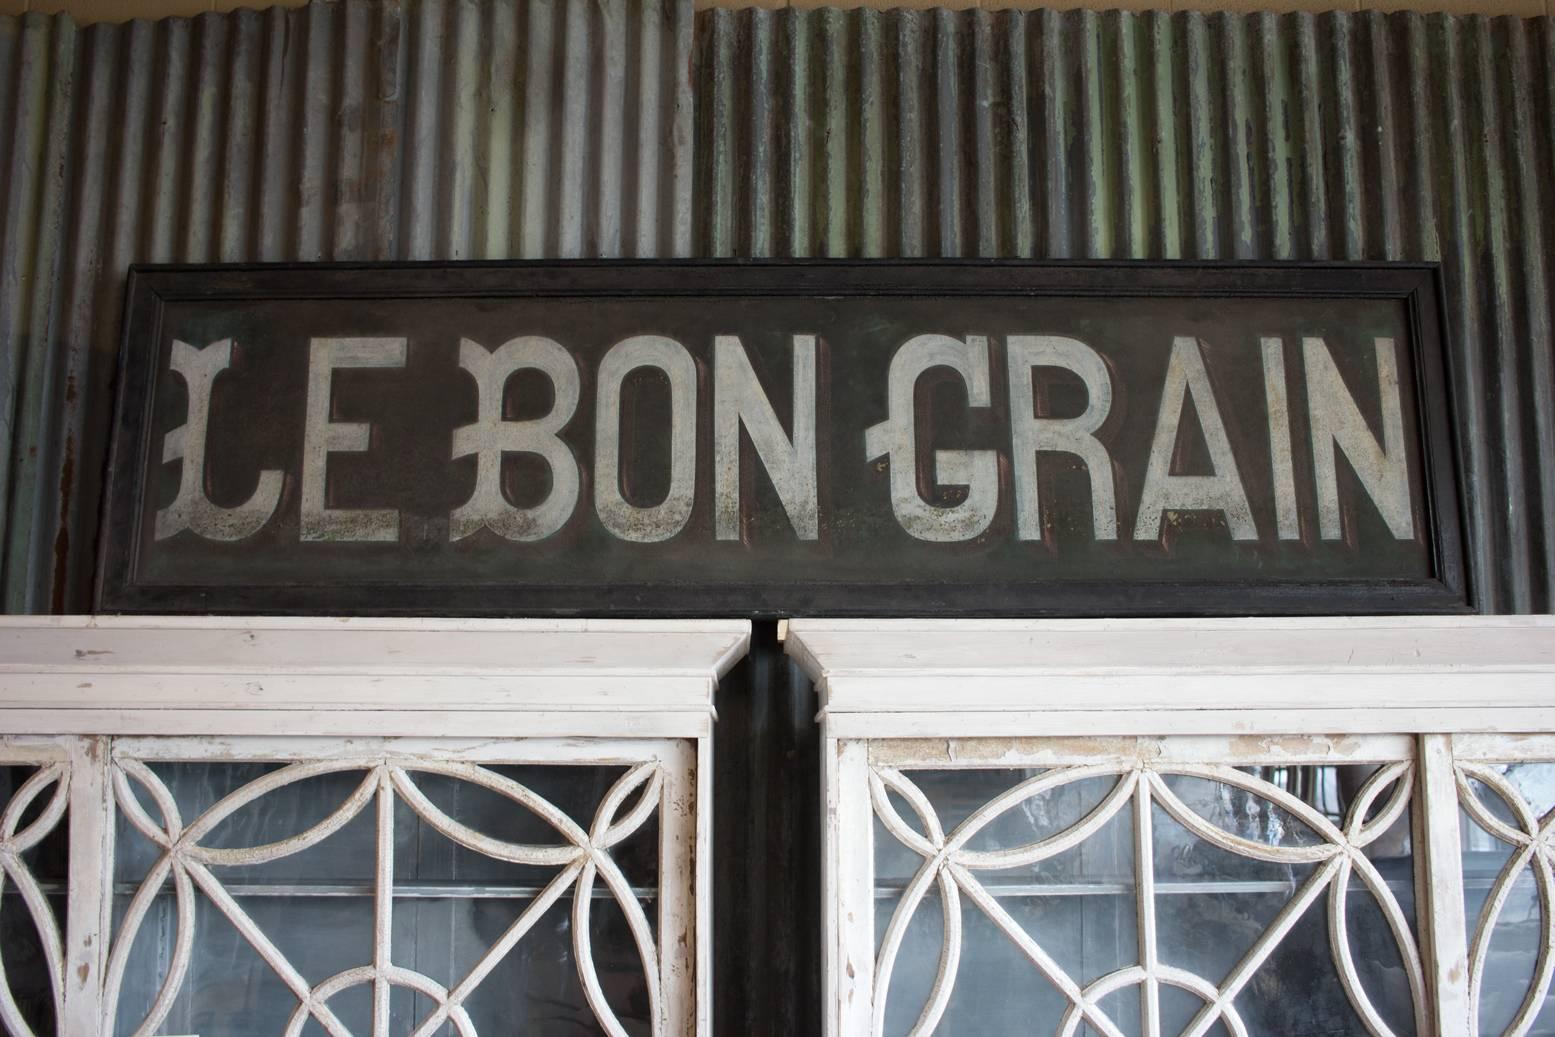 Vintage Belgian metal Industrial baker's sign, Le Bon Grain, from Haine Saint Pierre. It is hand-painted and framed in wood. Great size and color. Perfect wall art.